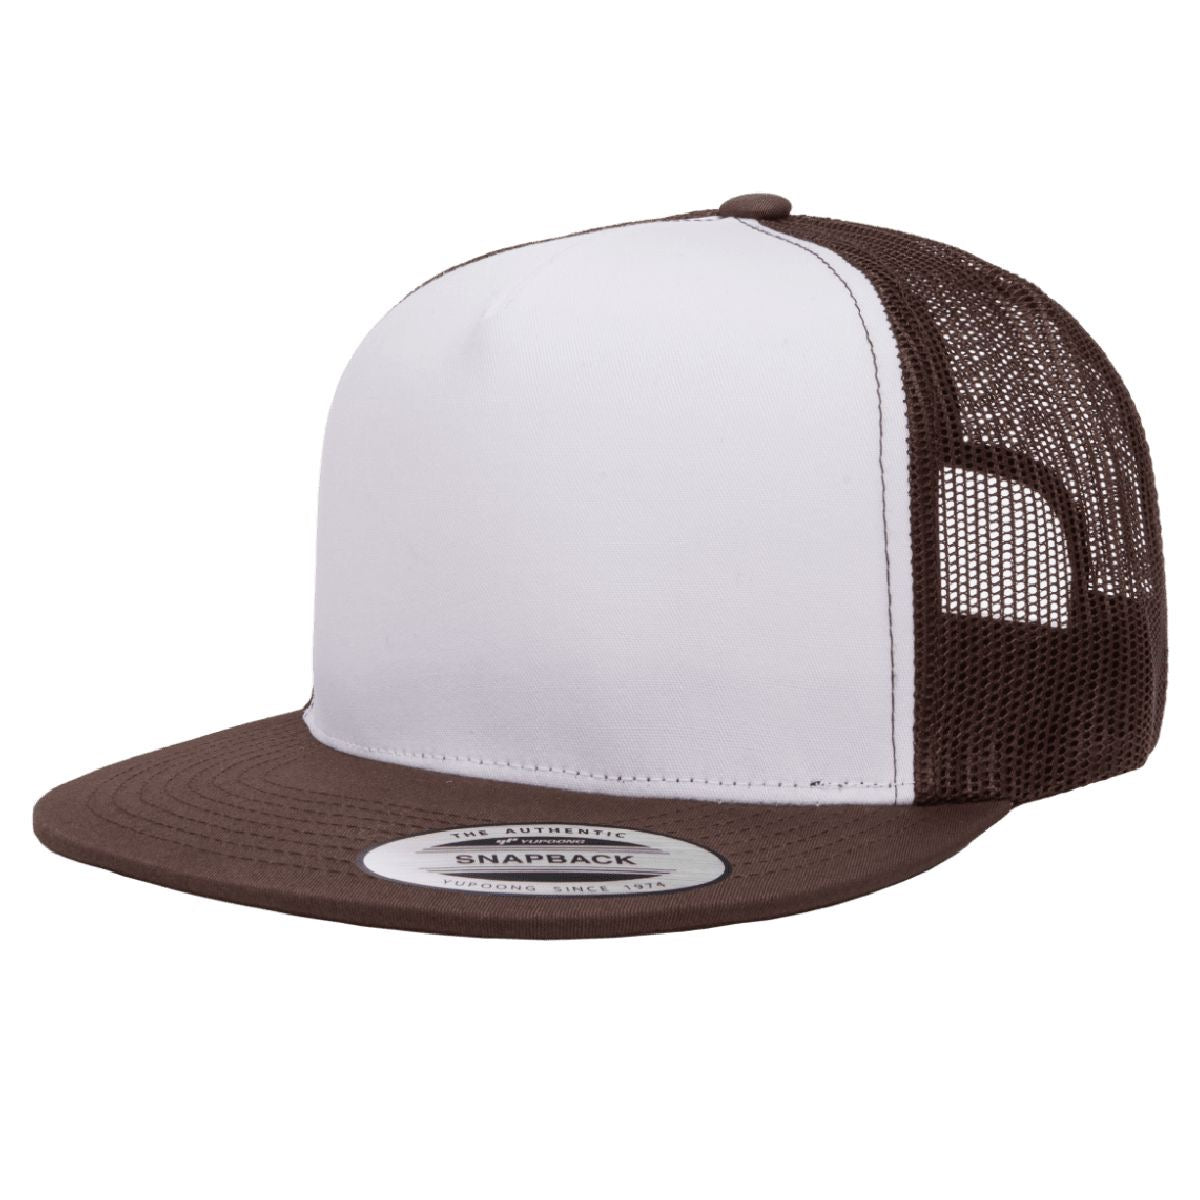 Yupoong 6006 Brown/White/Brown. Classic Trucker Snapback